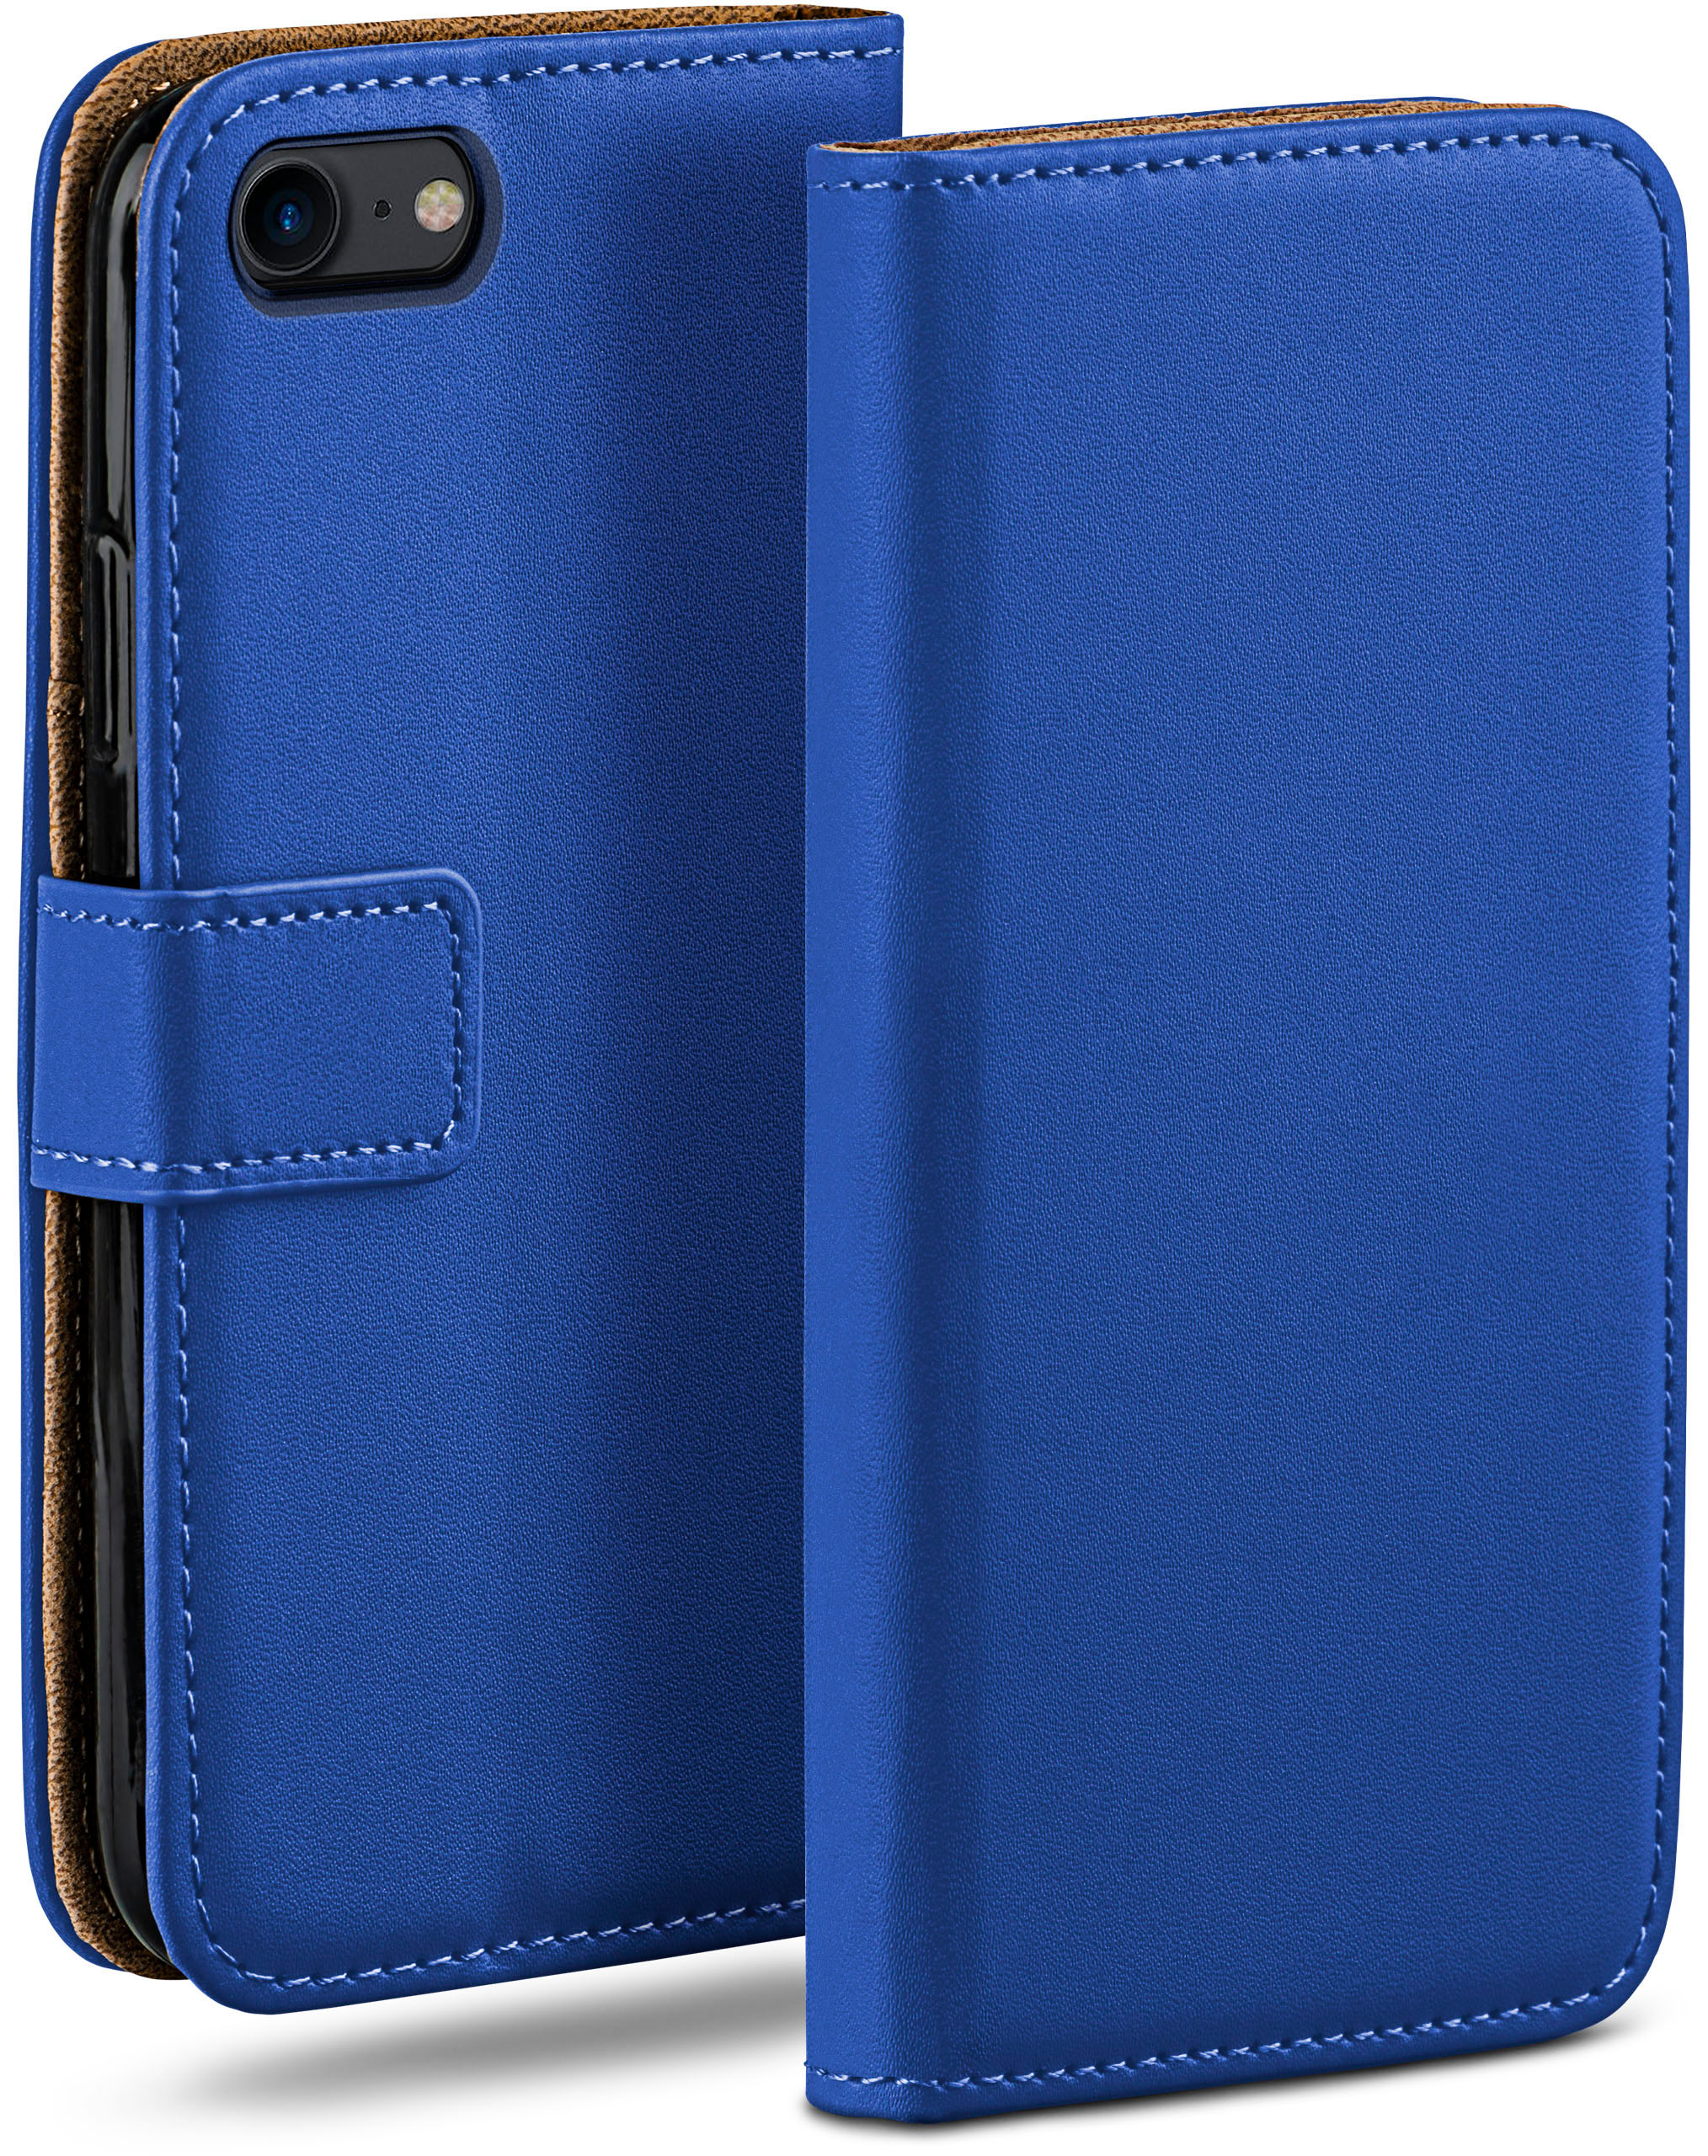 MOEX Book Case, Apple, iPhone 7 Bookcover, 8, Royal-Blue / iPhone